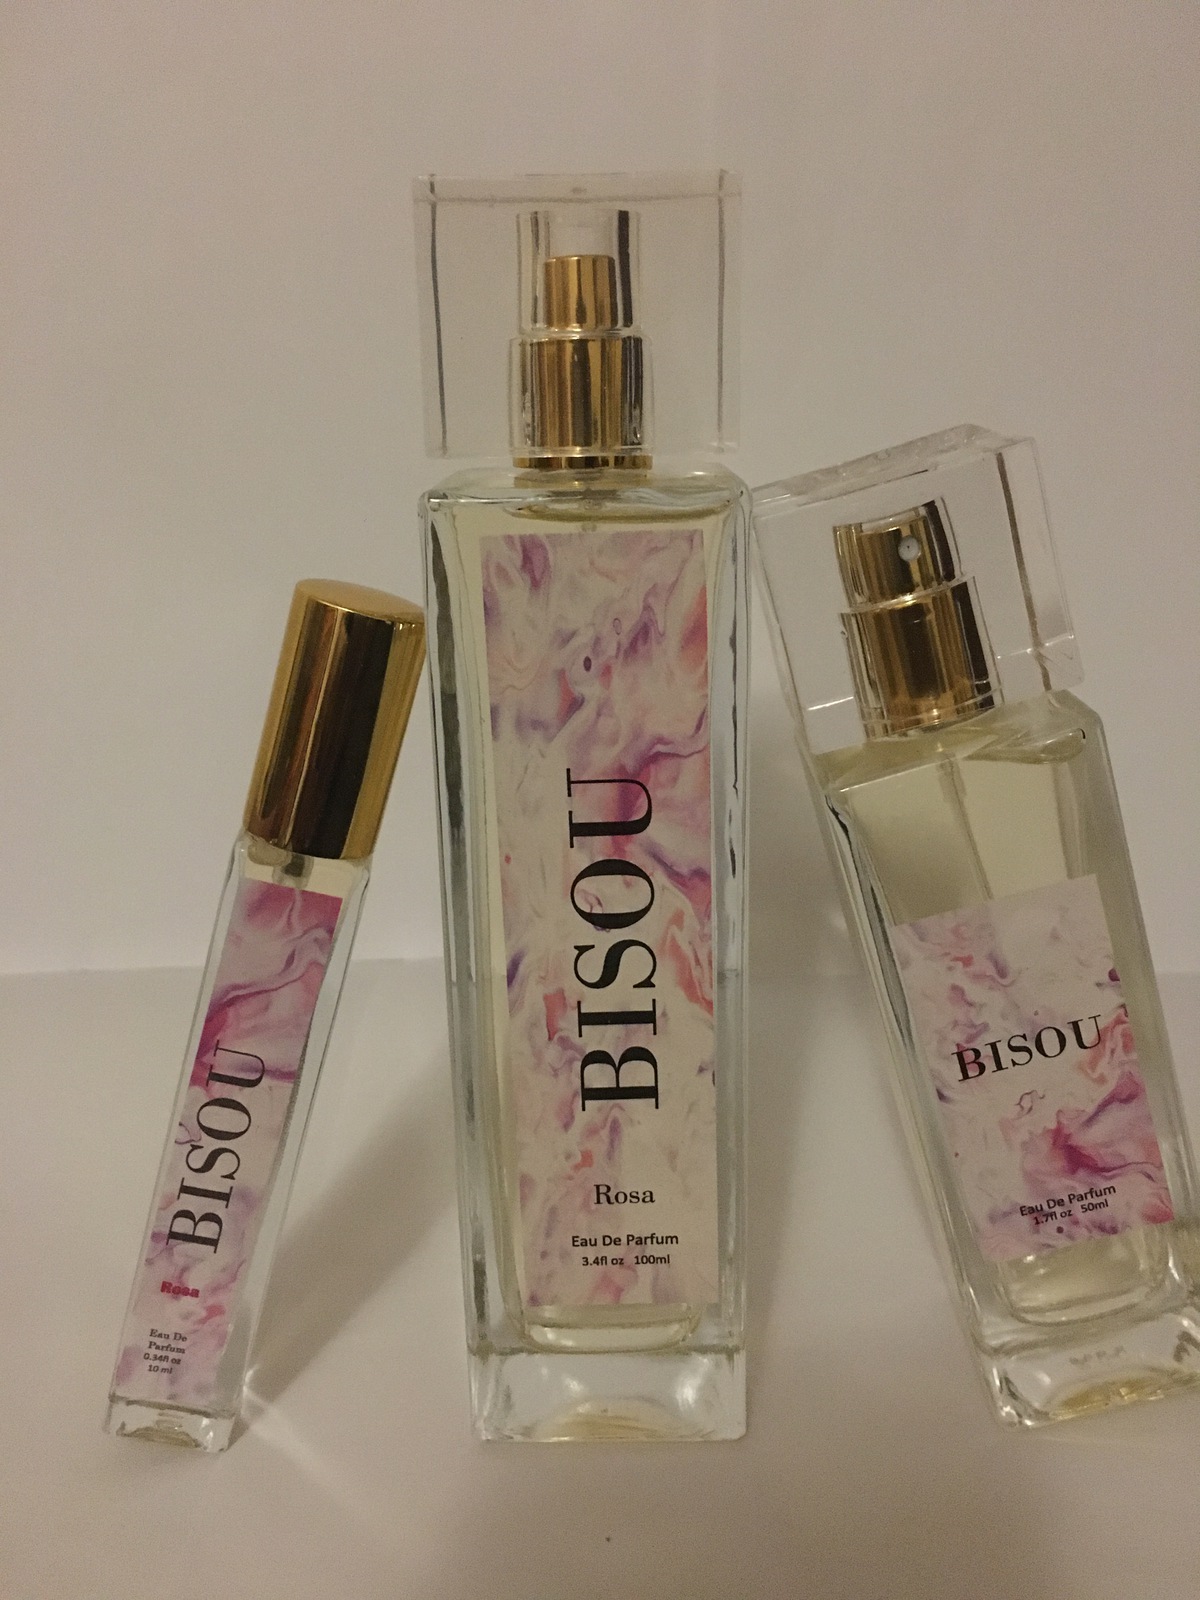 A set of three bottles with different scents.